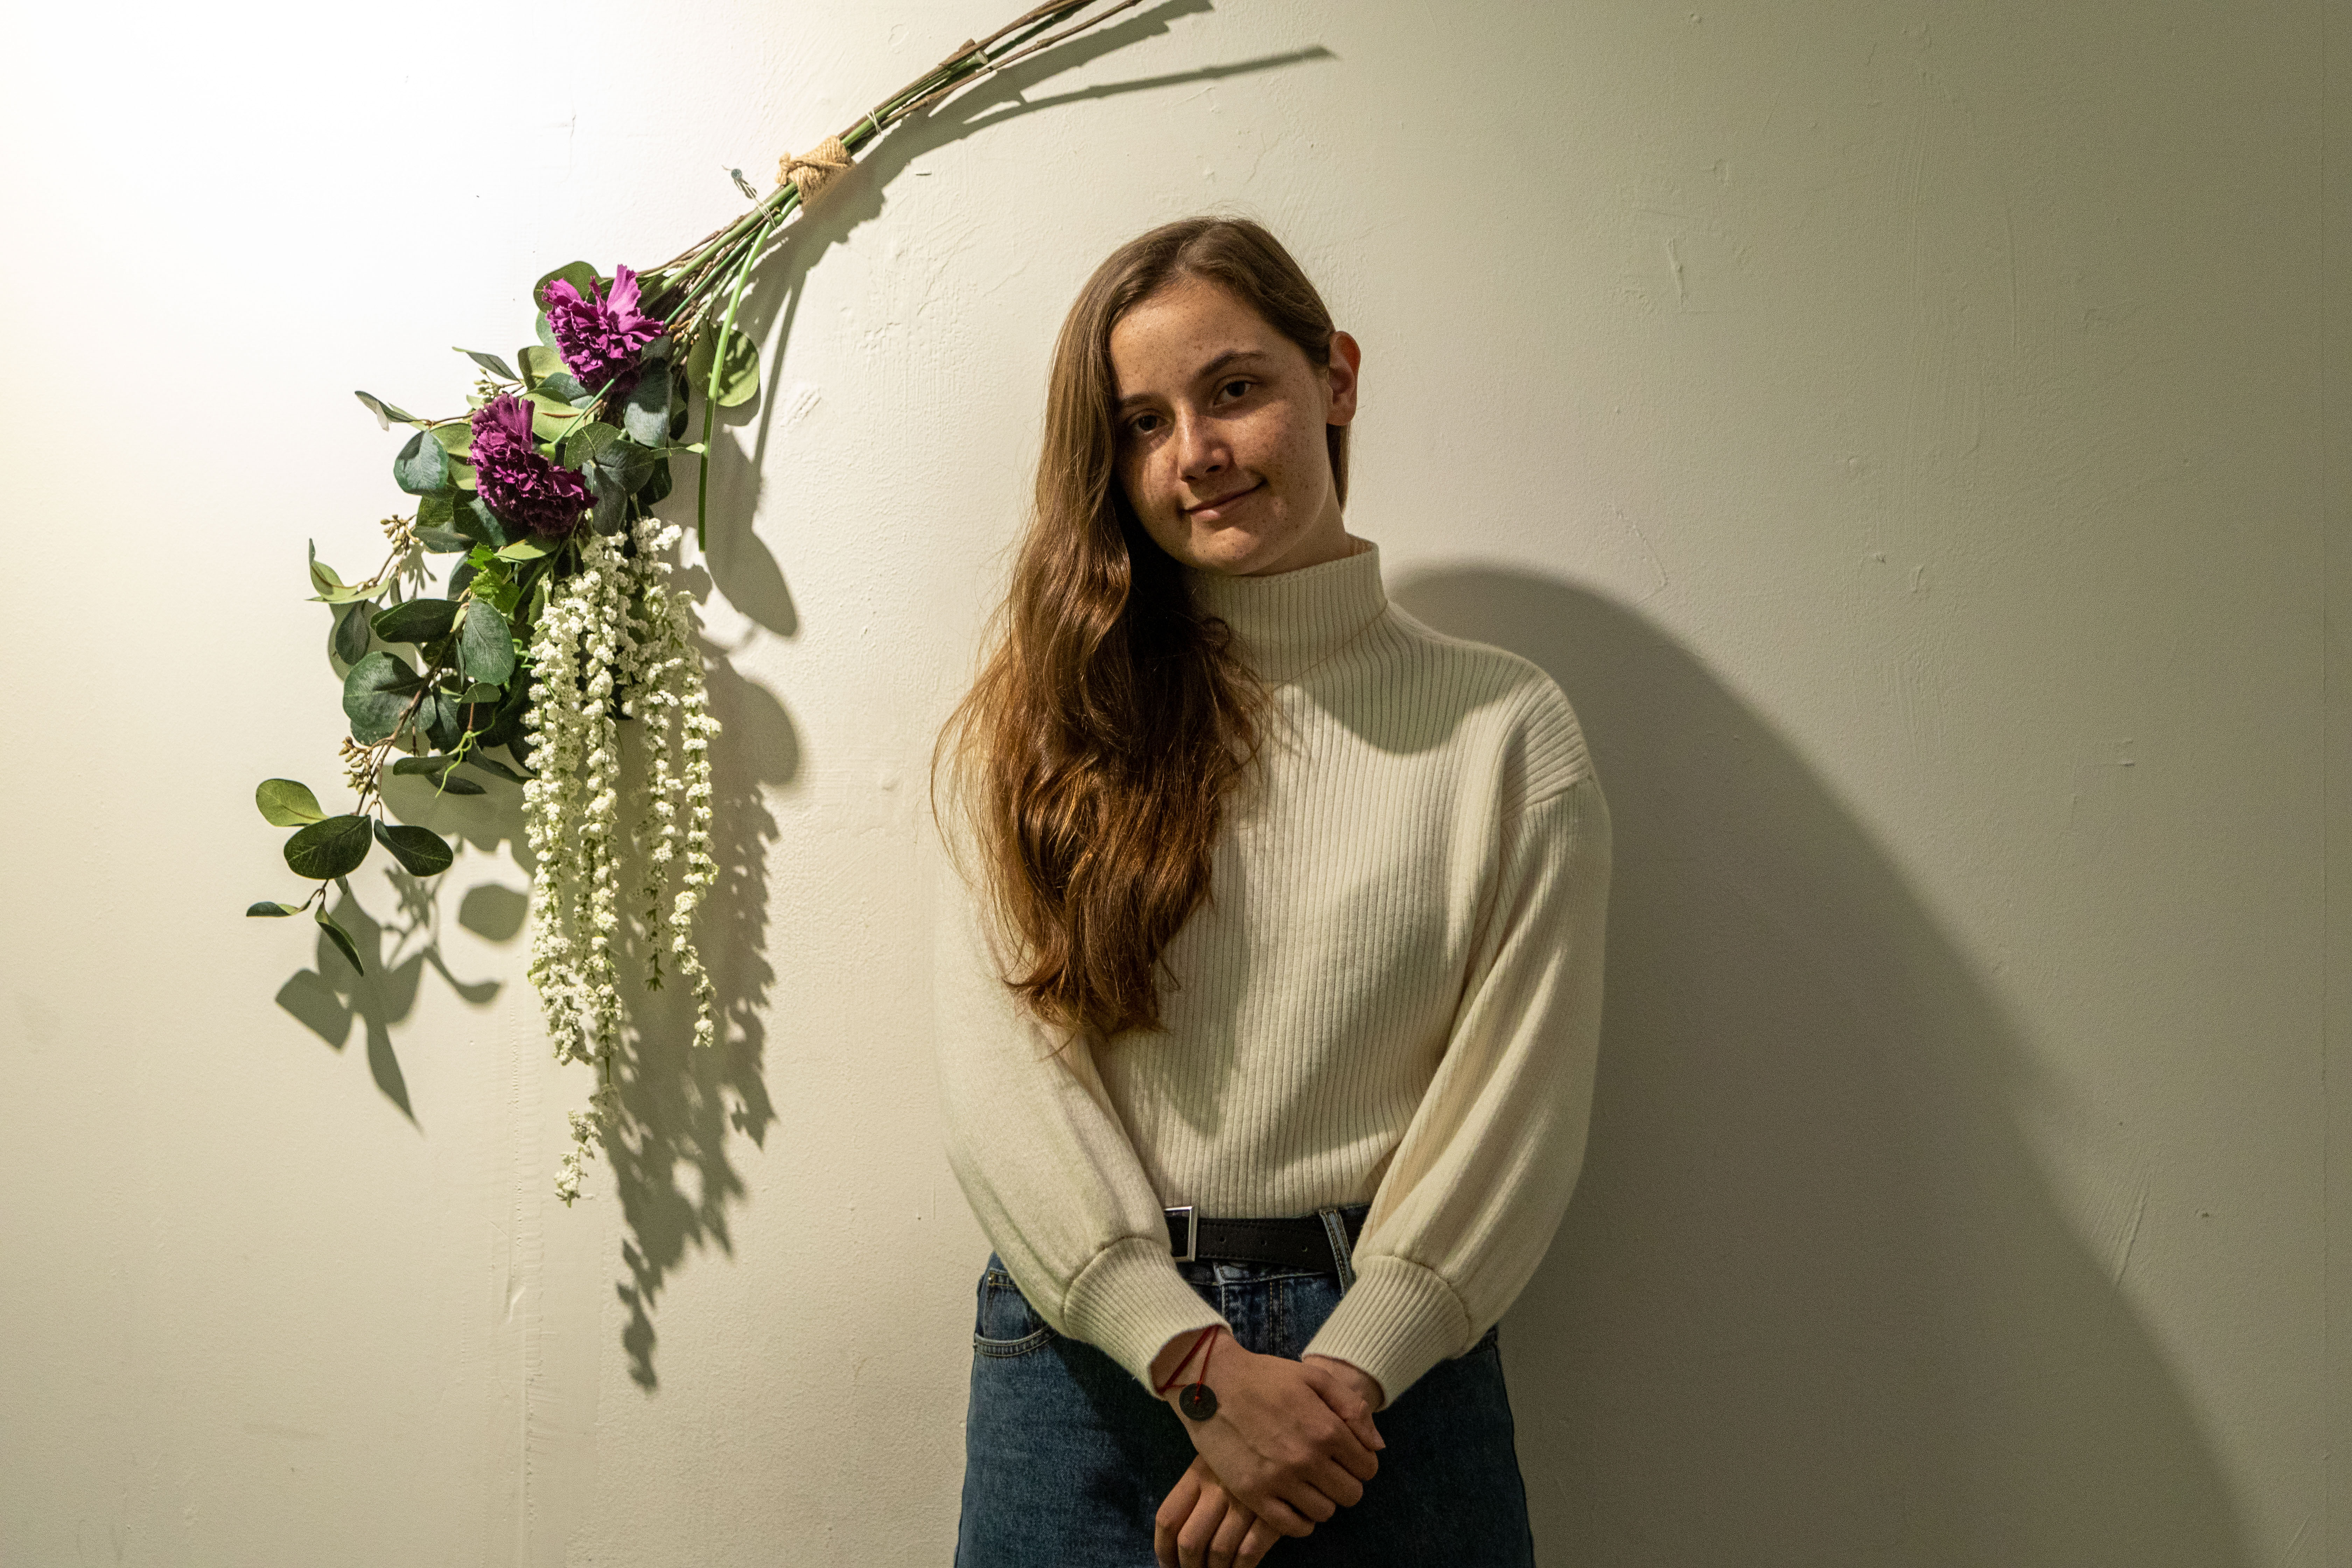 photo of student standing with flowers behind smiling